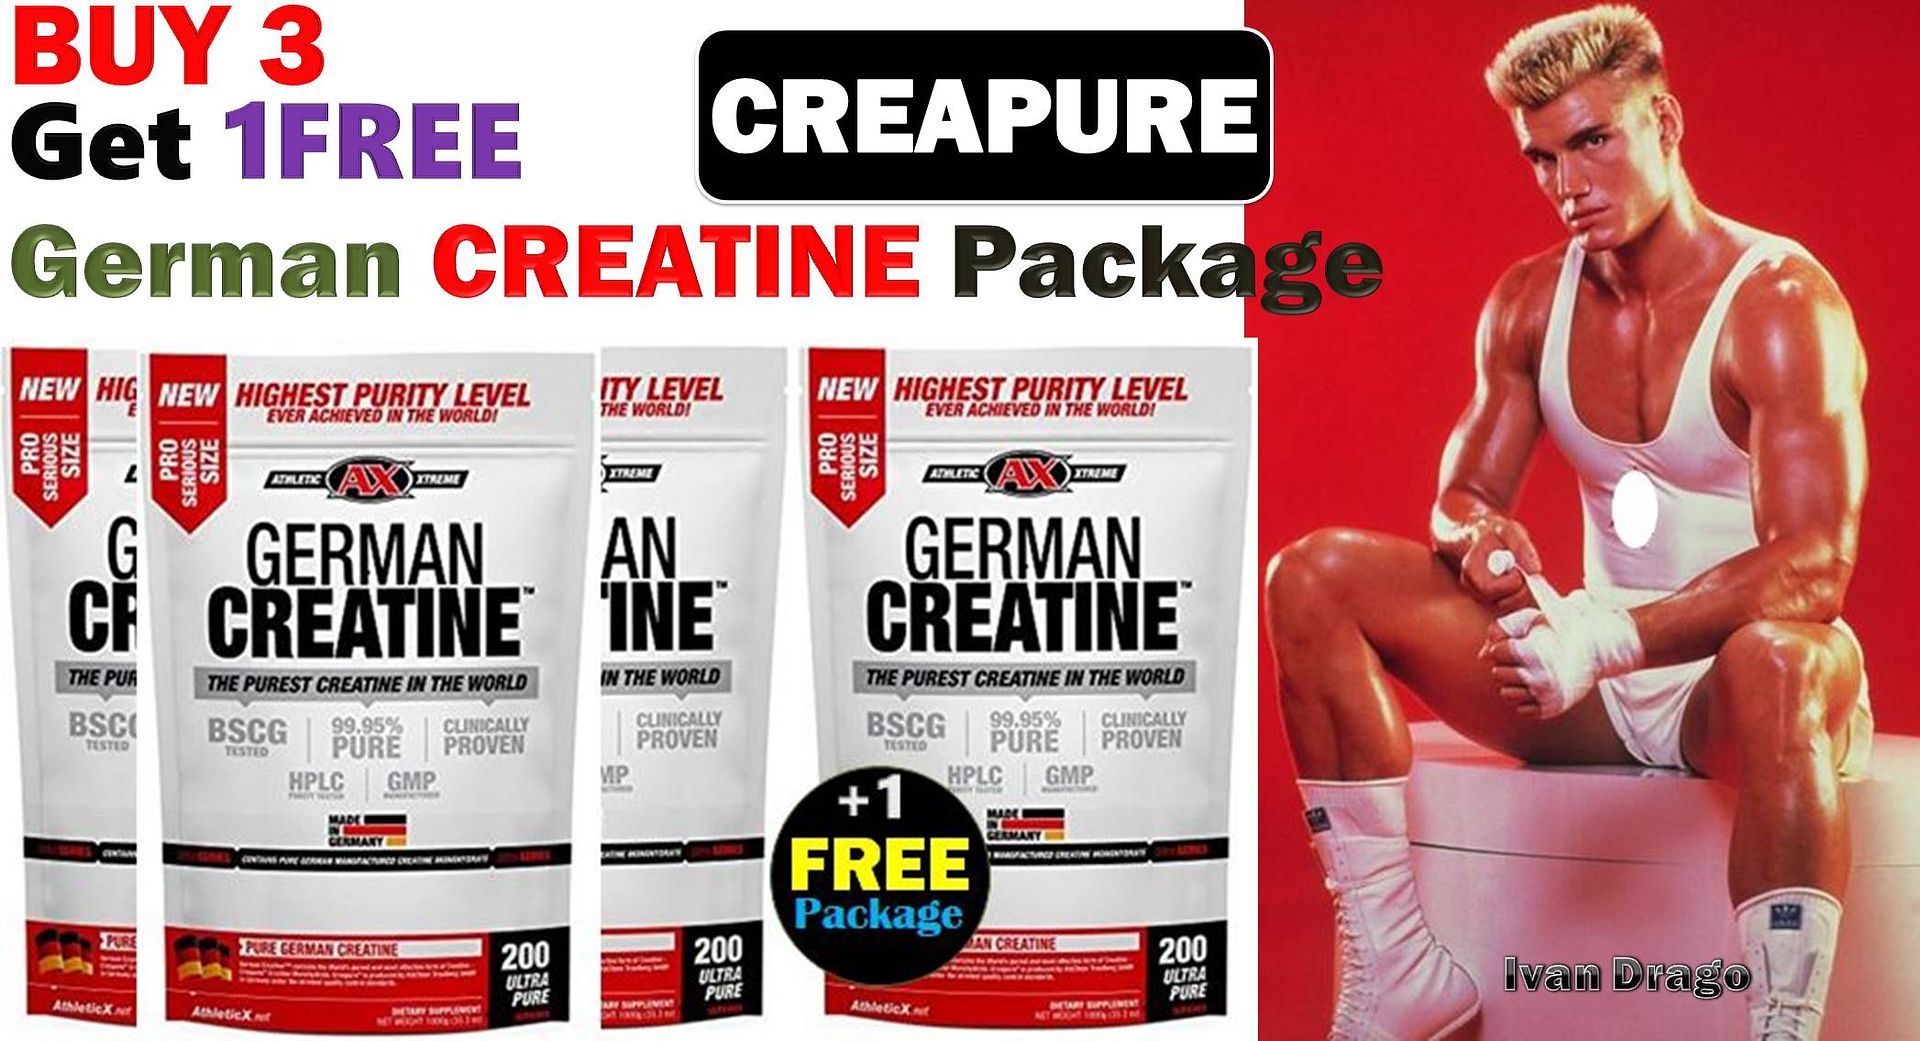 German Creatine by Athletic Xtreme